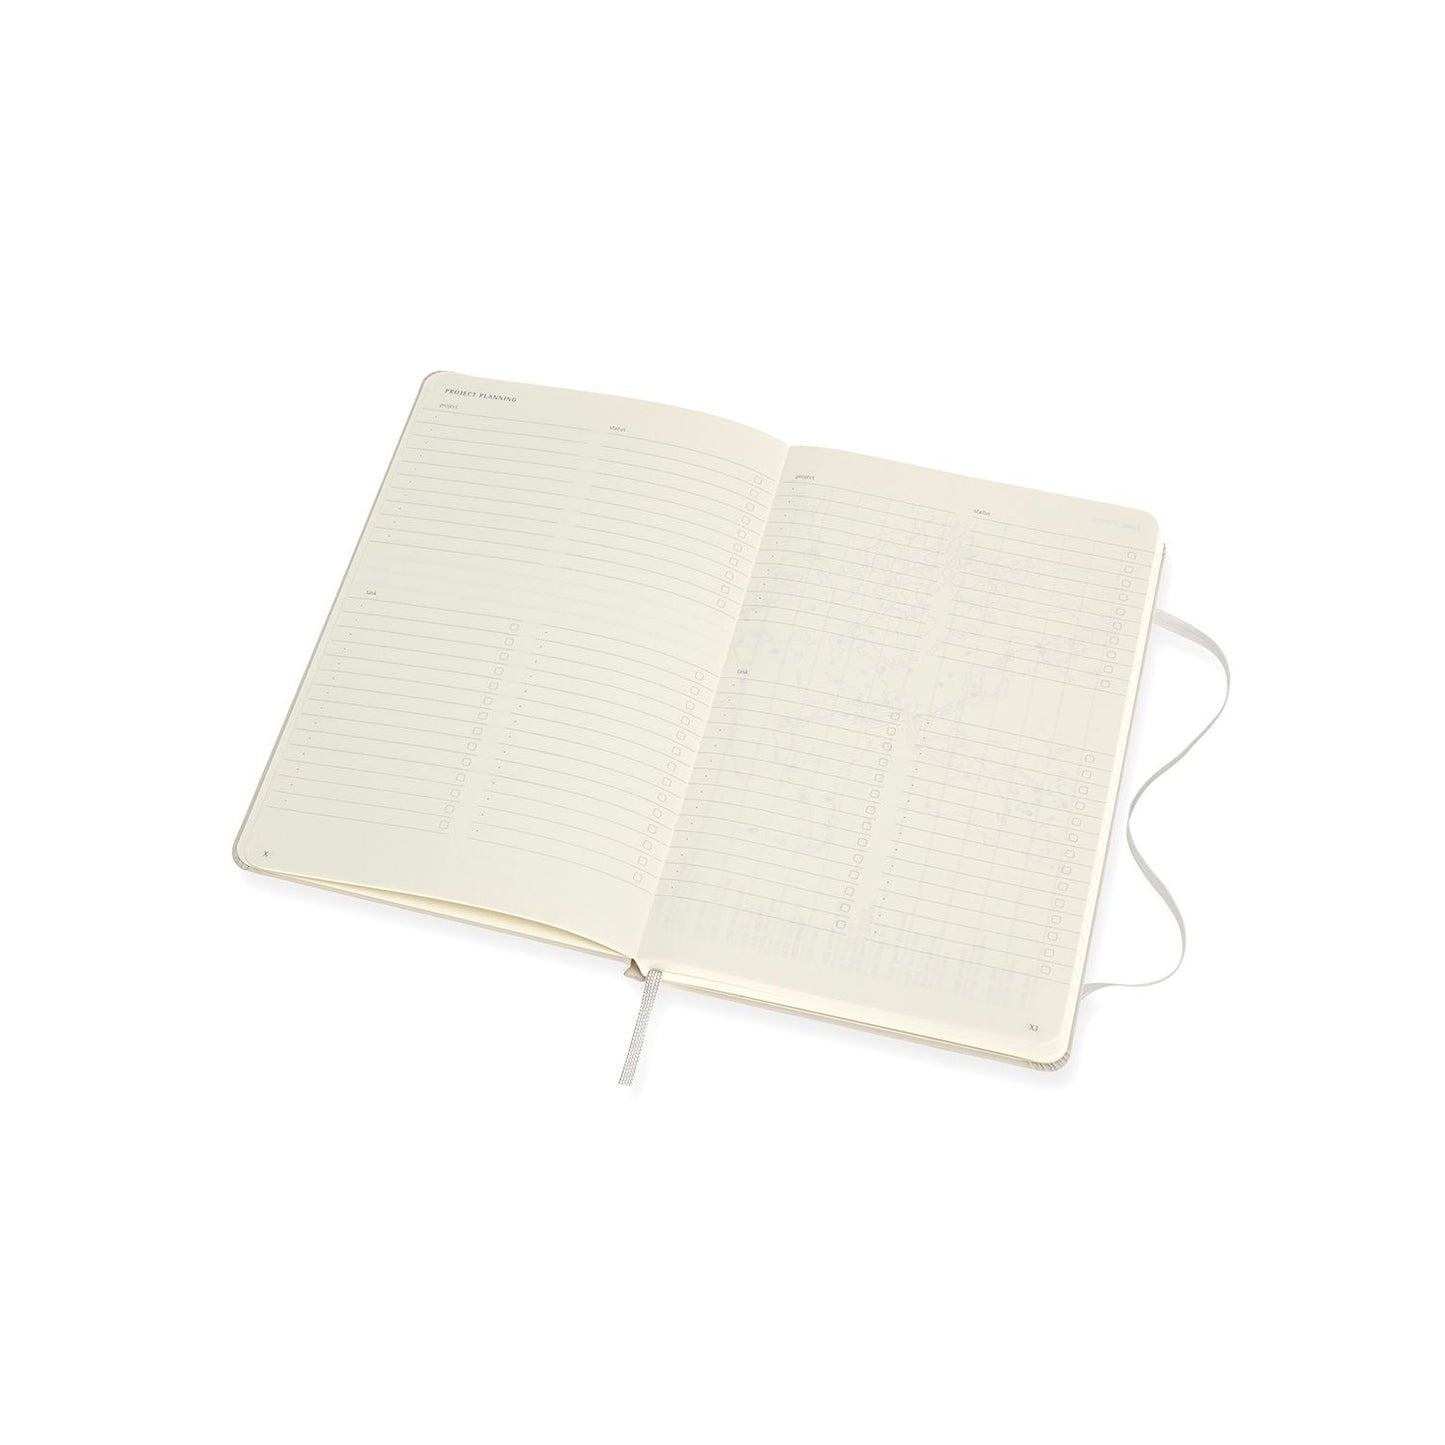 Pro Notebook - Hard Cover